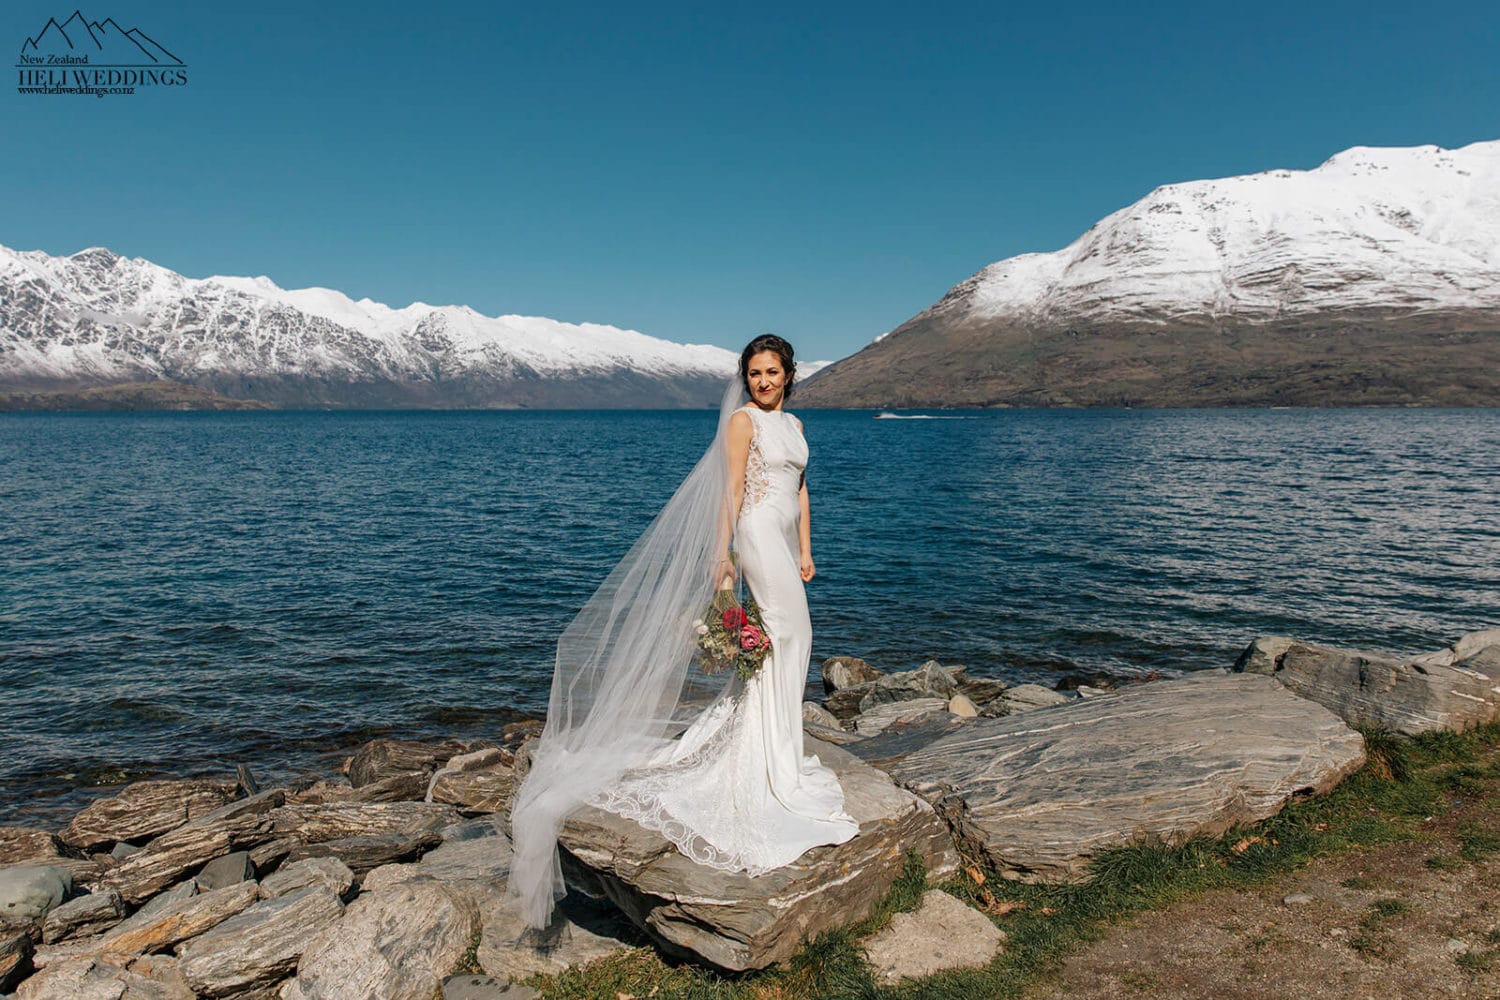 Wedding by the lake in Queenstown